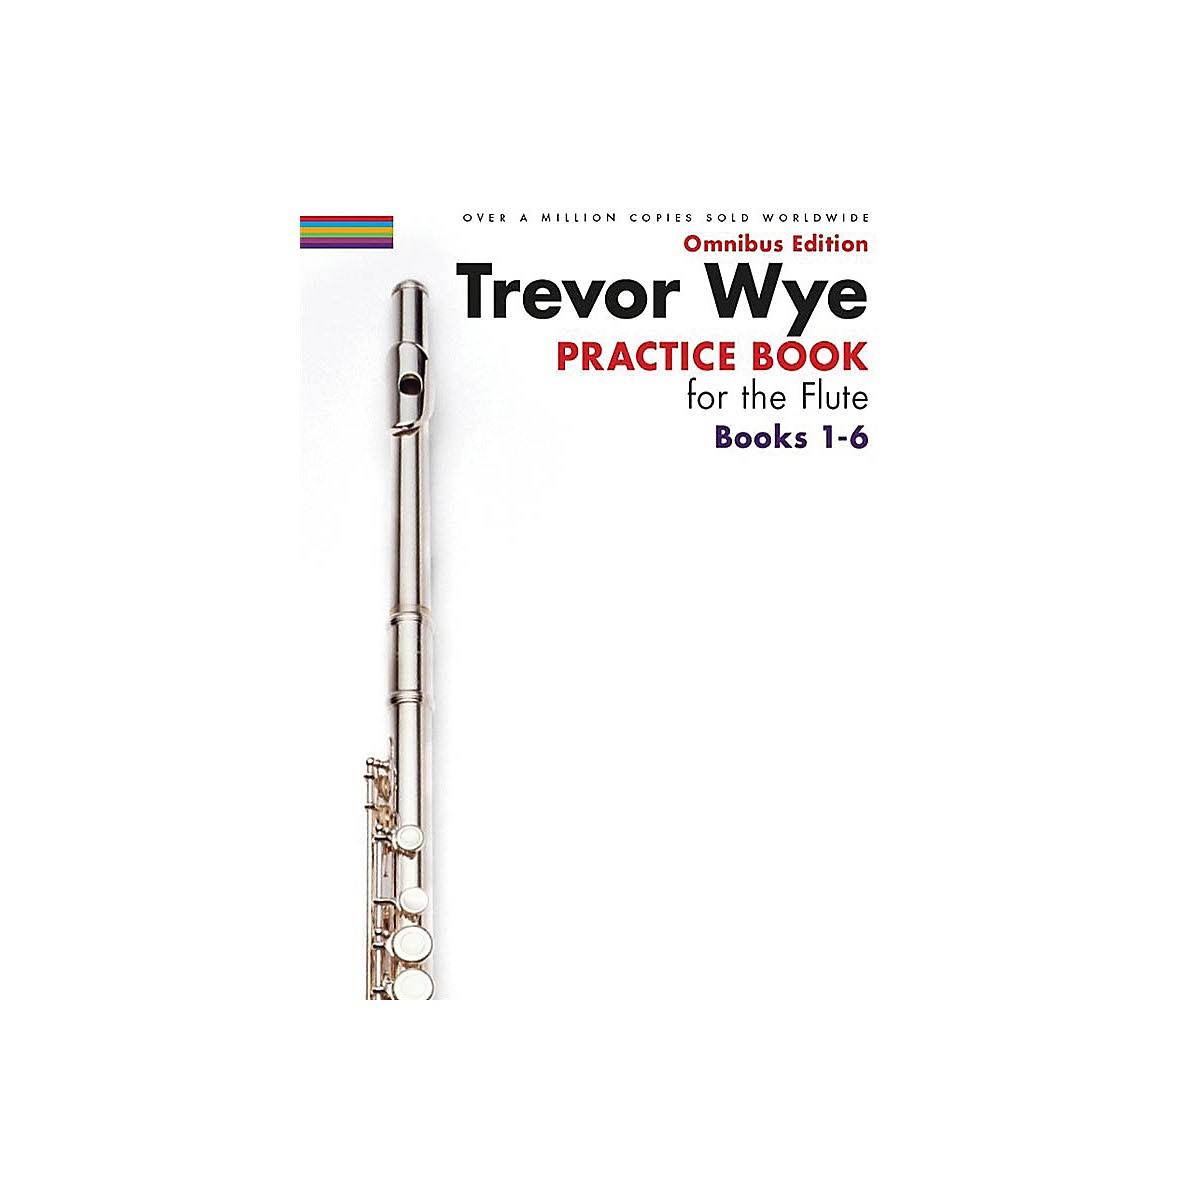 Trevor Wye - Practice Book for the Flute - Omnibus Edition Books 1-6 - Sheet Music